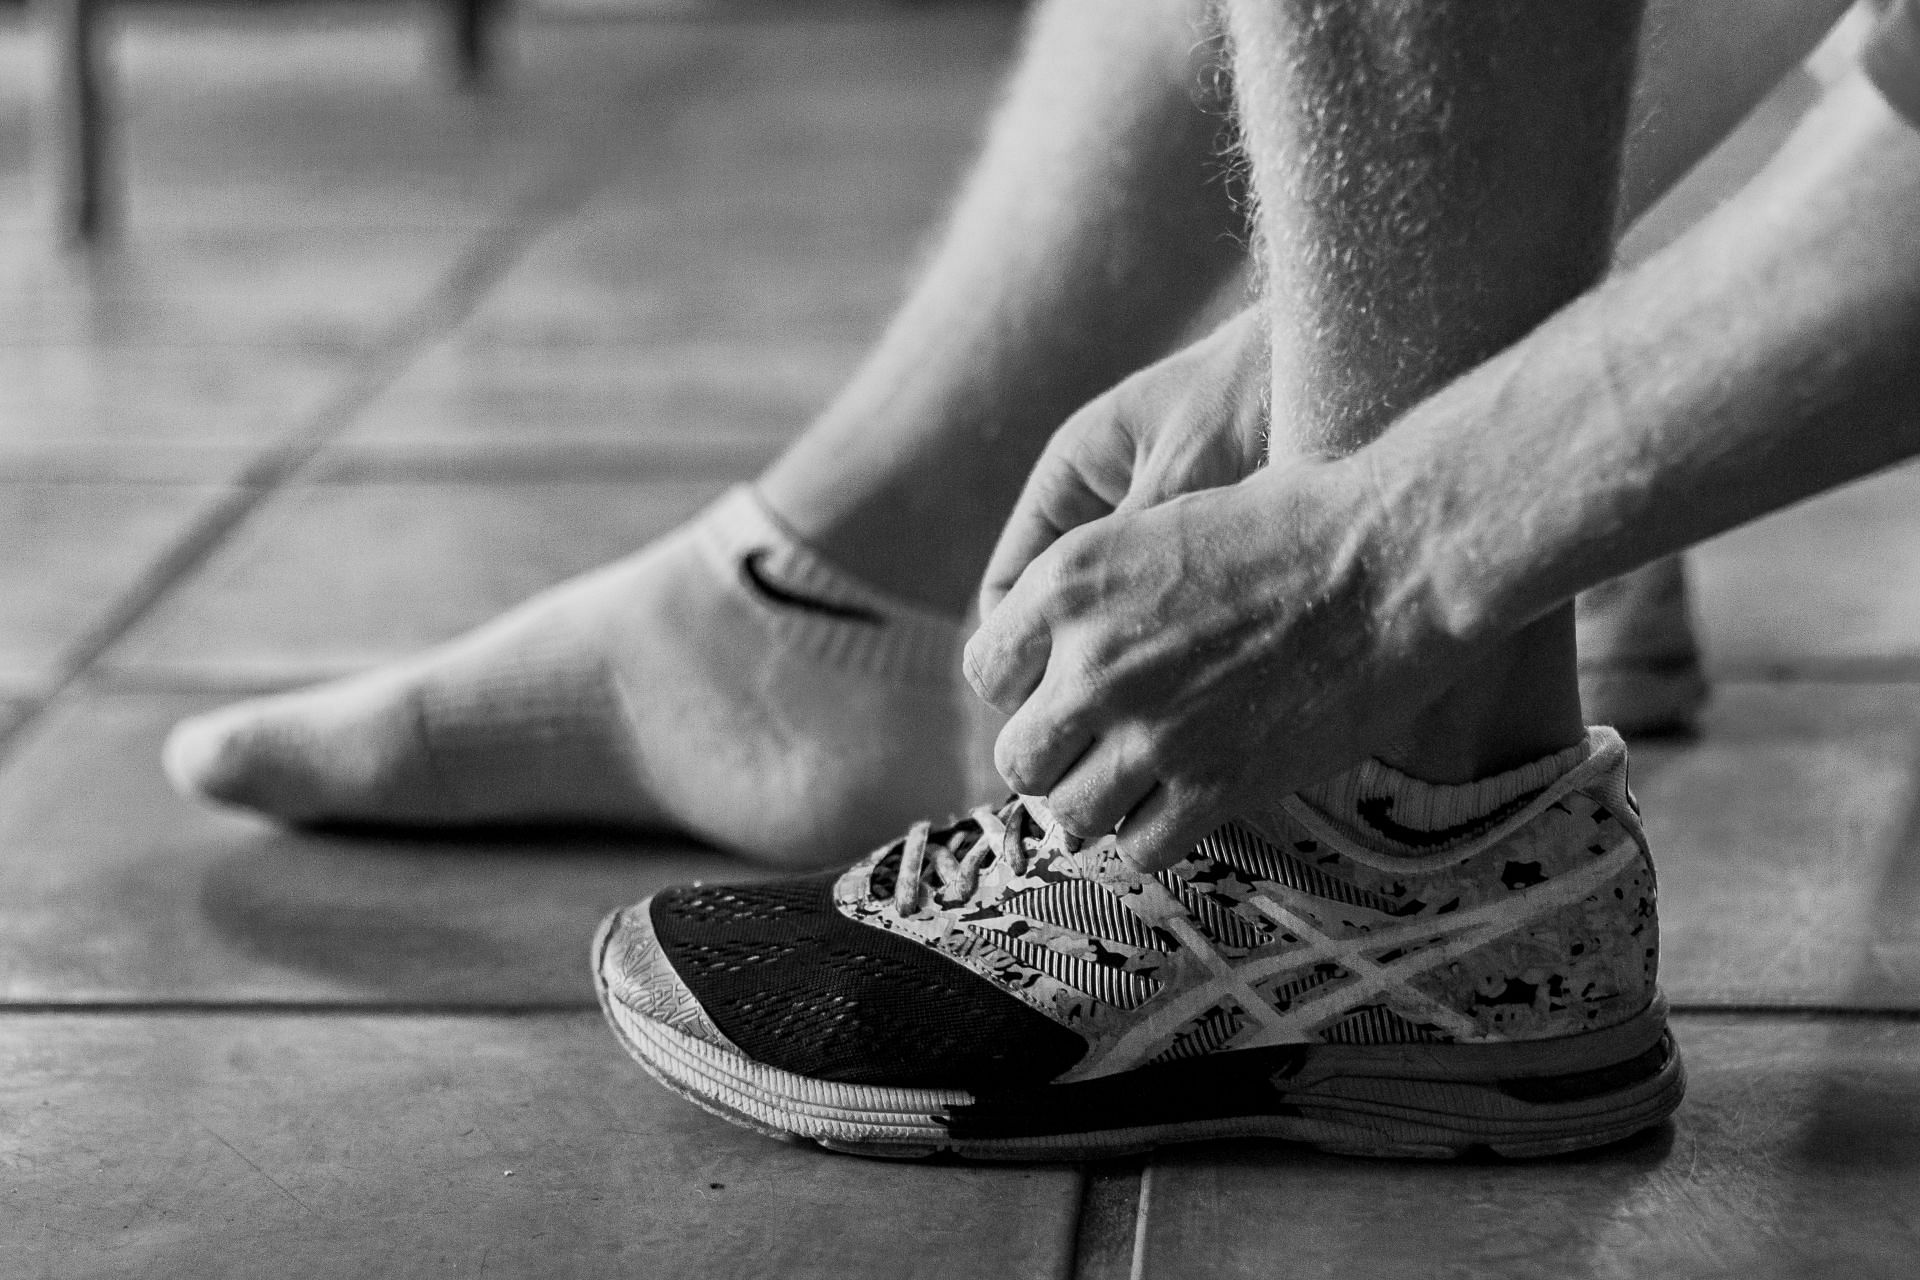 Delaying treatment for an ankle injury can have serious consequences (Image via Unsplash)